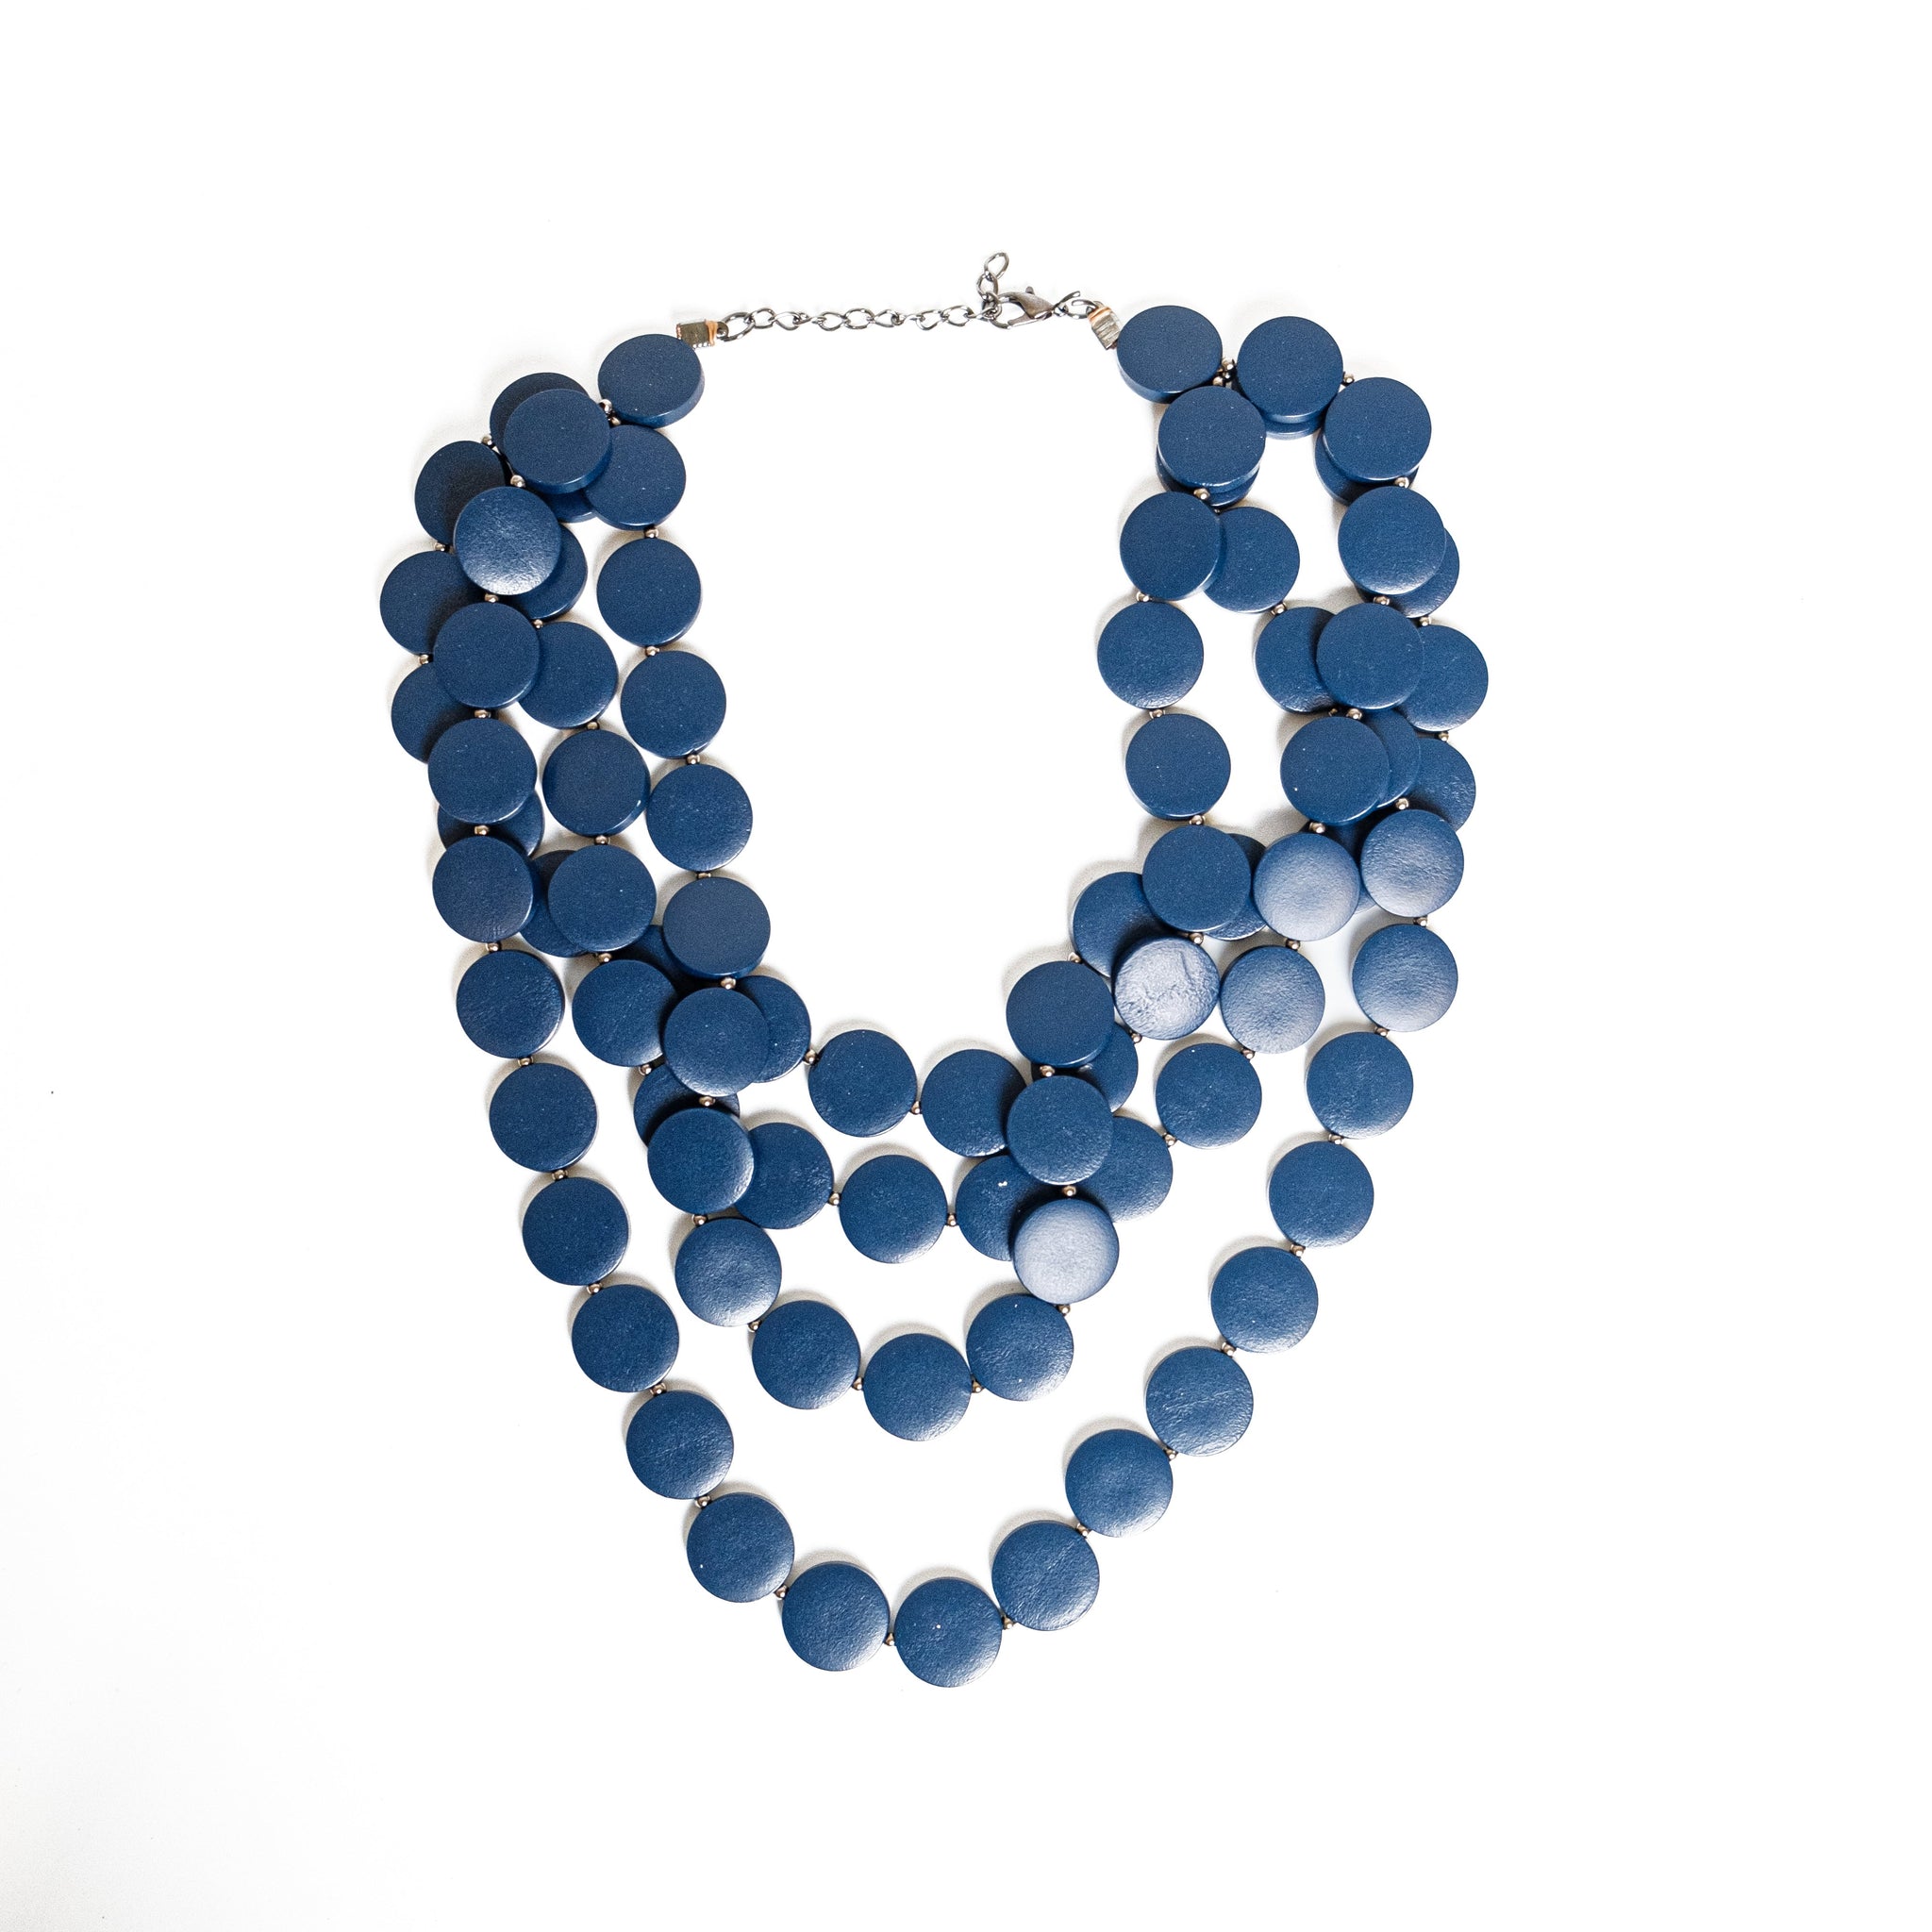 Chokore Bohemian Necklace with Wooden Beads (Blue)